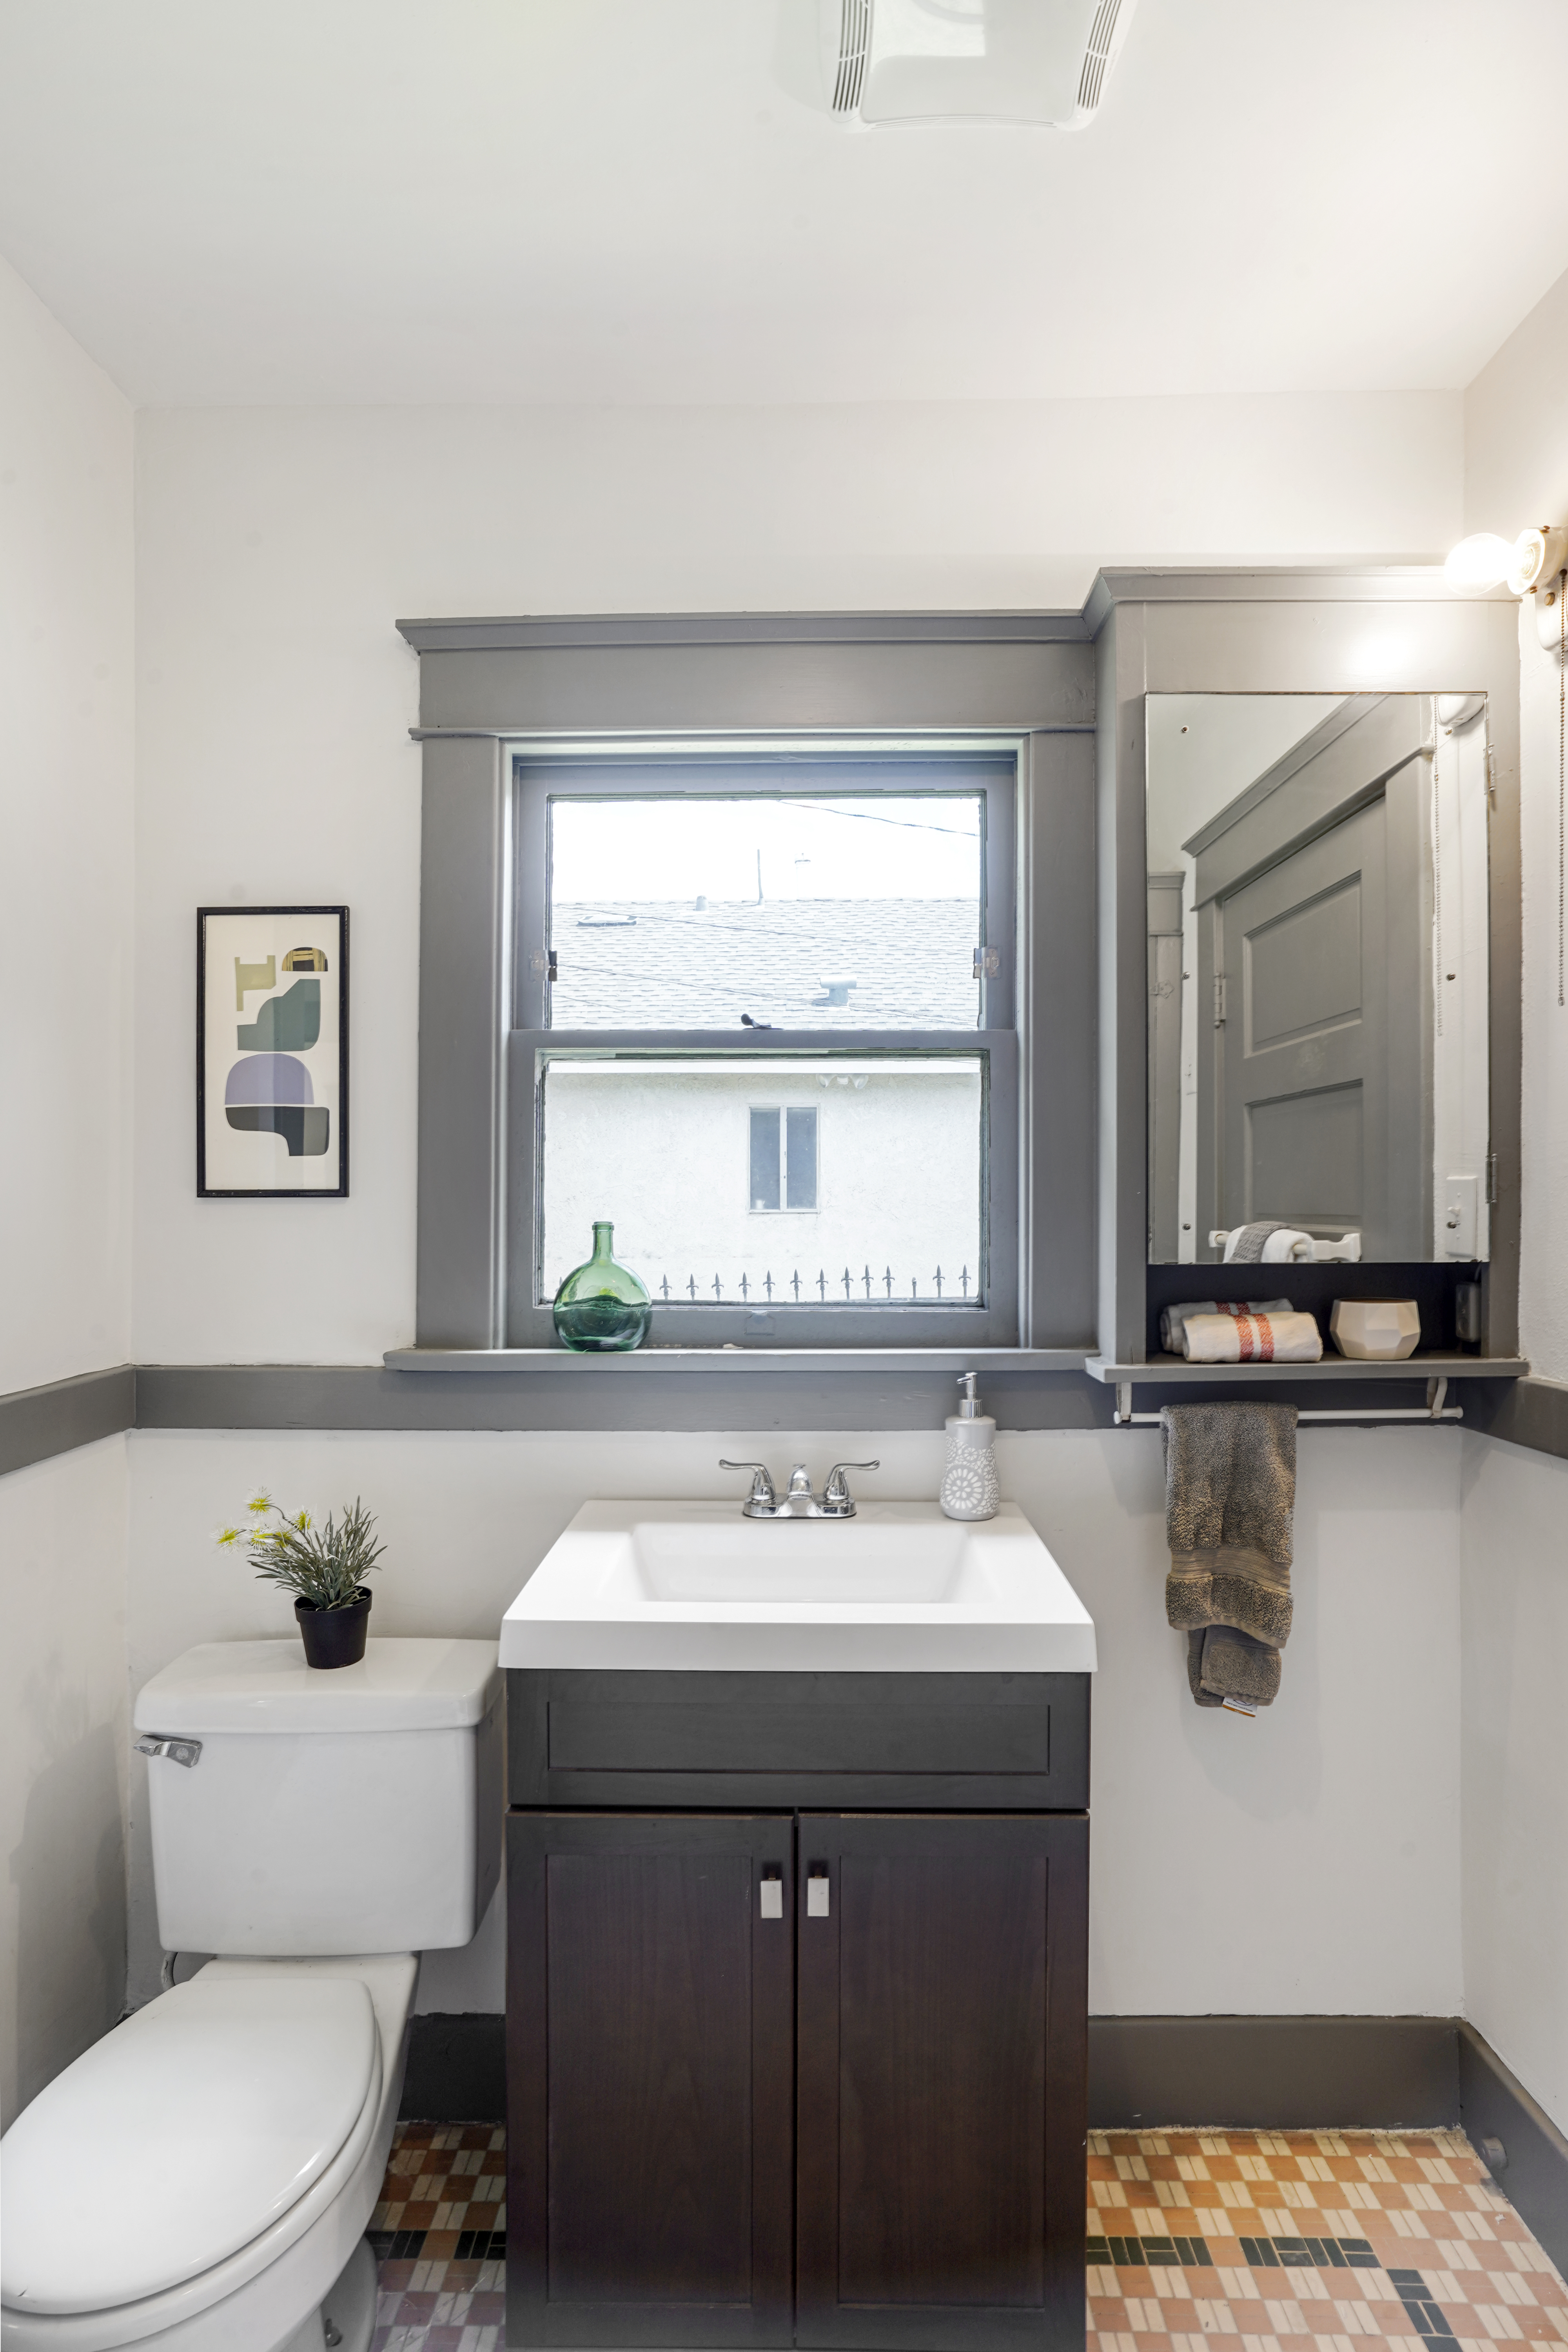 11 Ways To Maximize Every Inch Of Your Small Bathroom